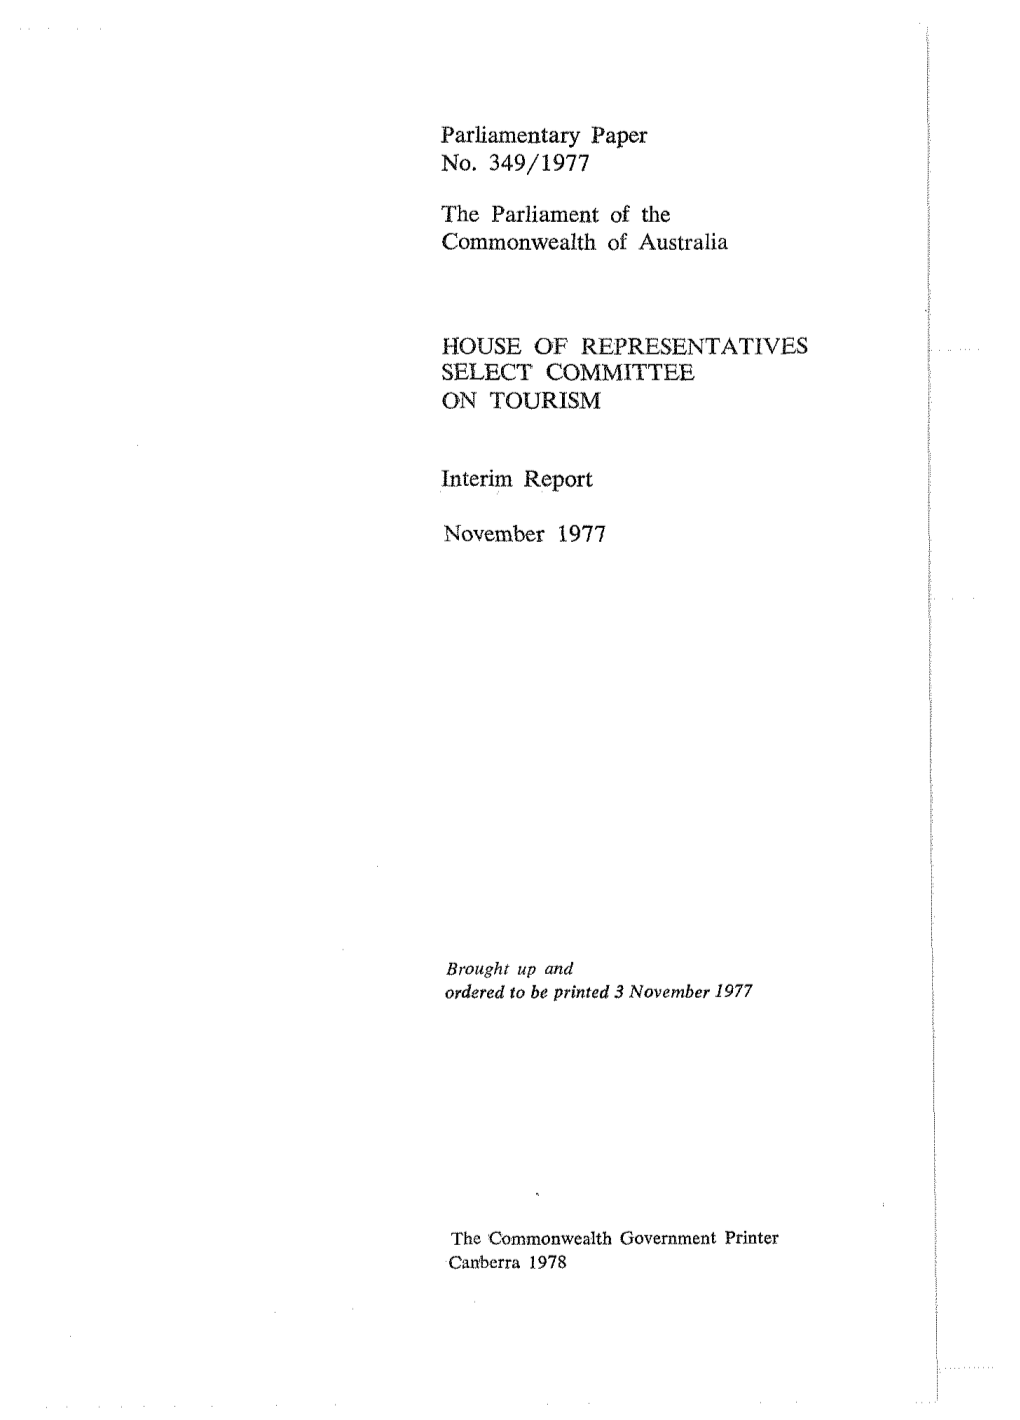 Parliamentary Paper No. 349/1977 the Parliament of the Commonwealth of Australia